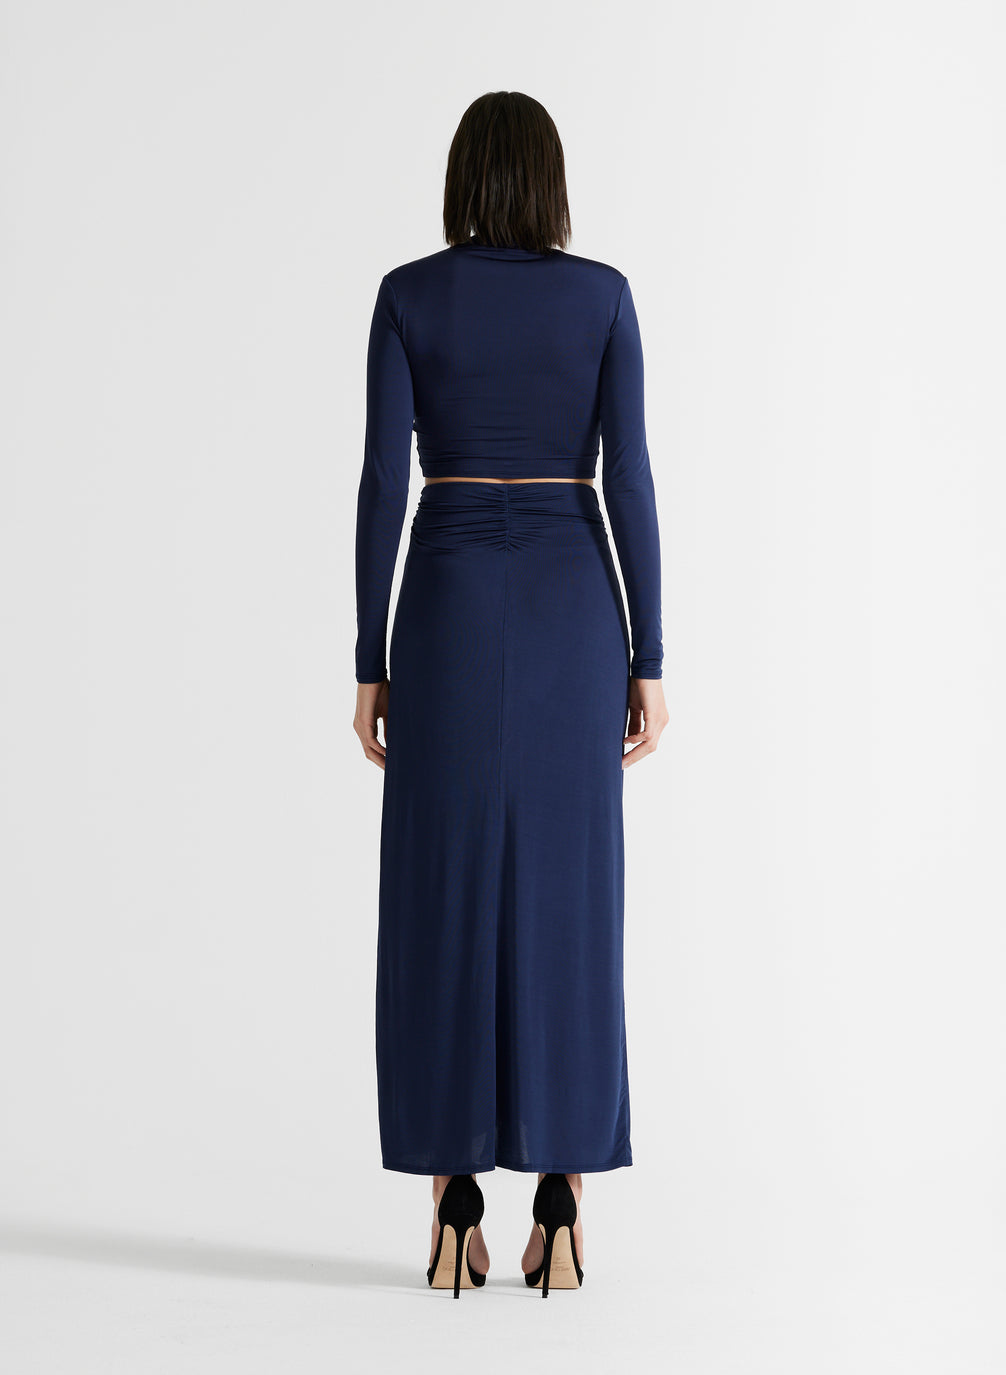 back view of woman wearing navy blue ruched long sleeve crop top and matching navy blue skirt